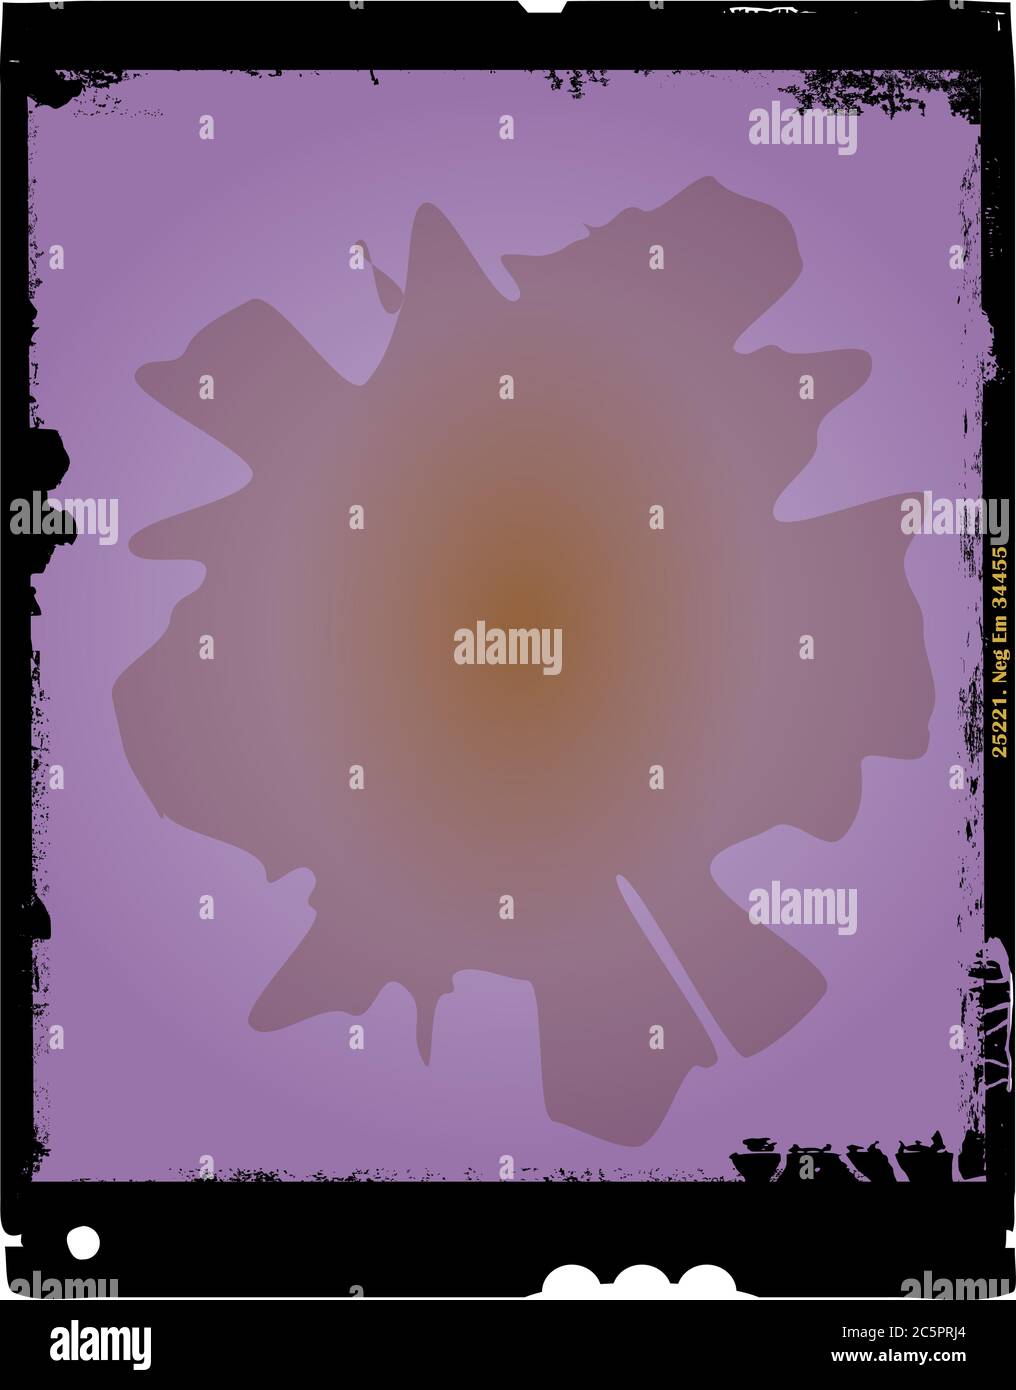 Large picture frames vector vectors Stock Vector Images - Page 2 - Alamy